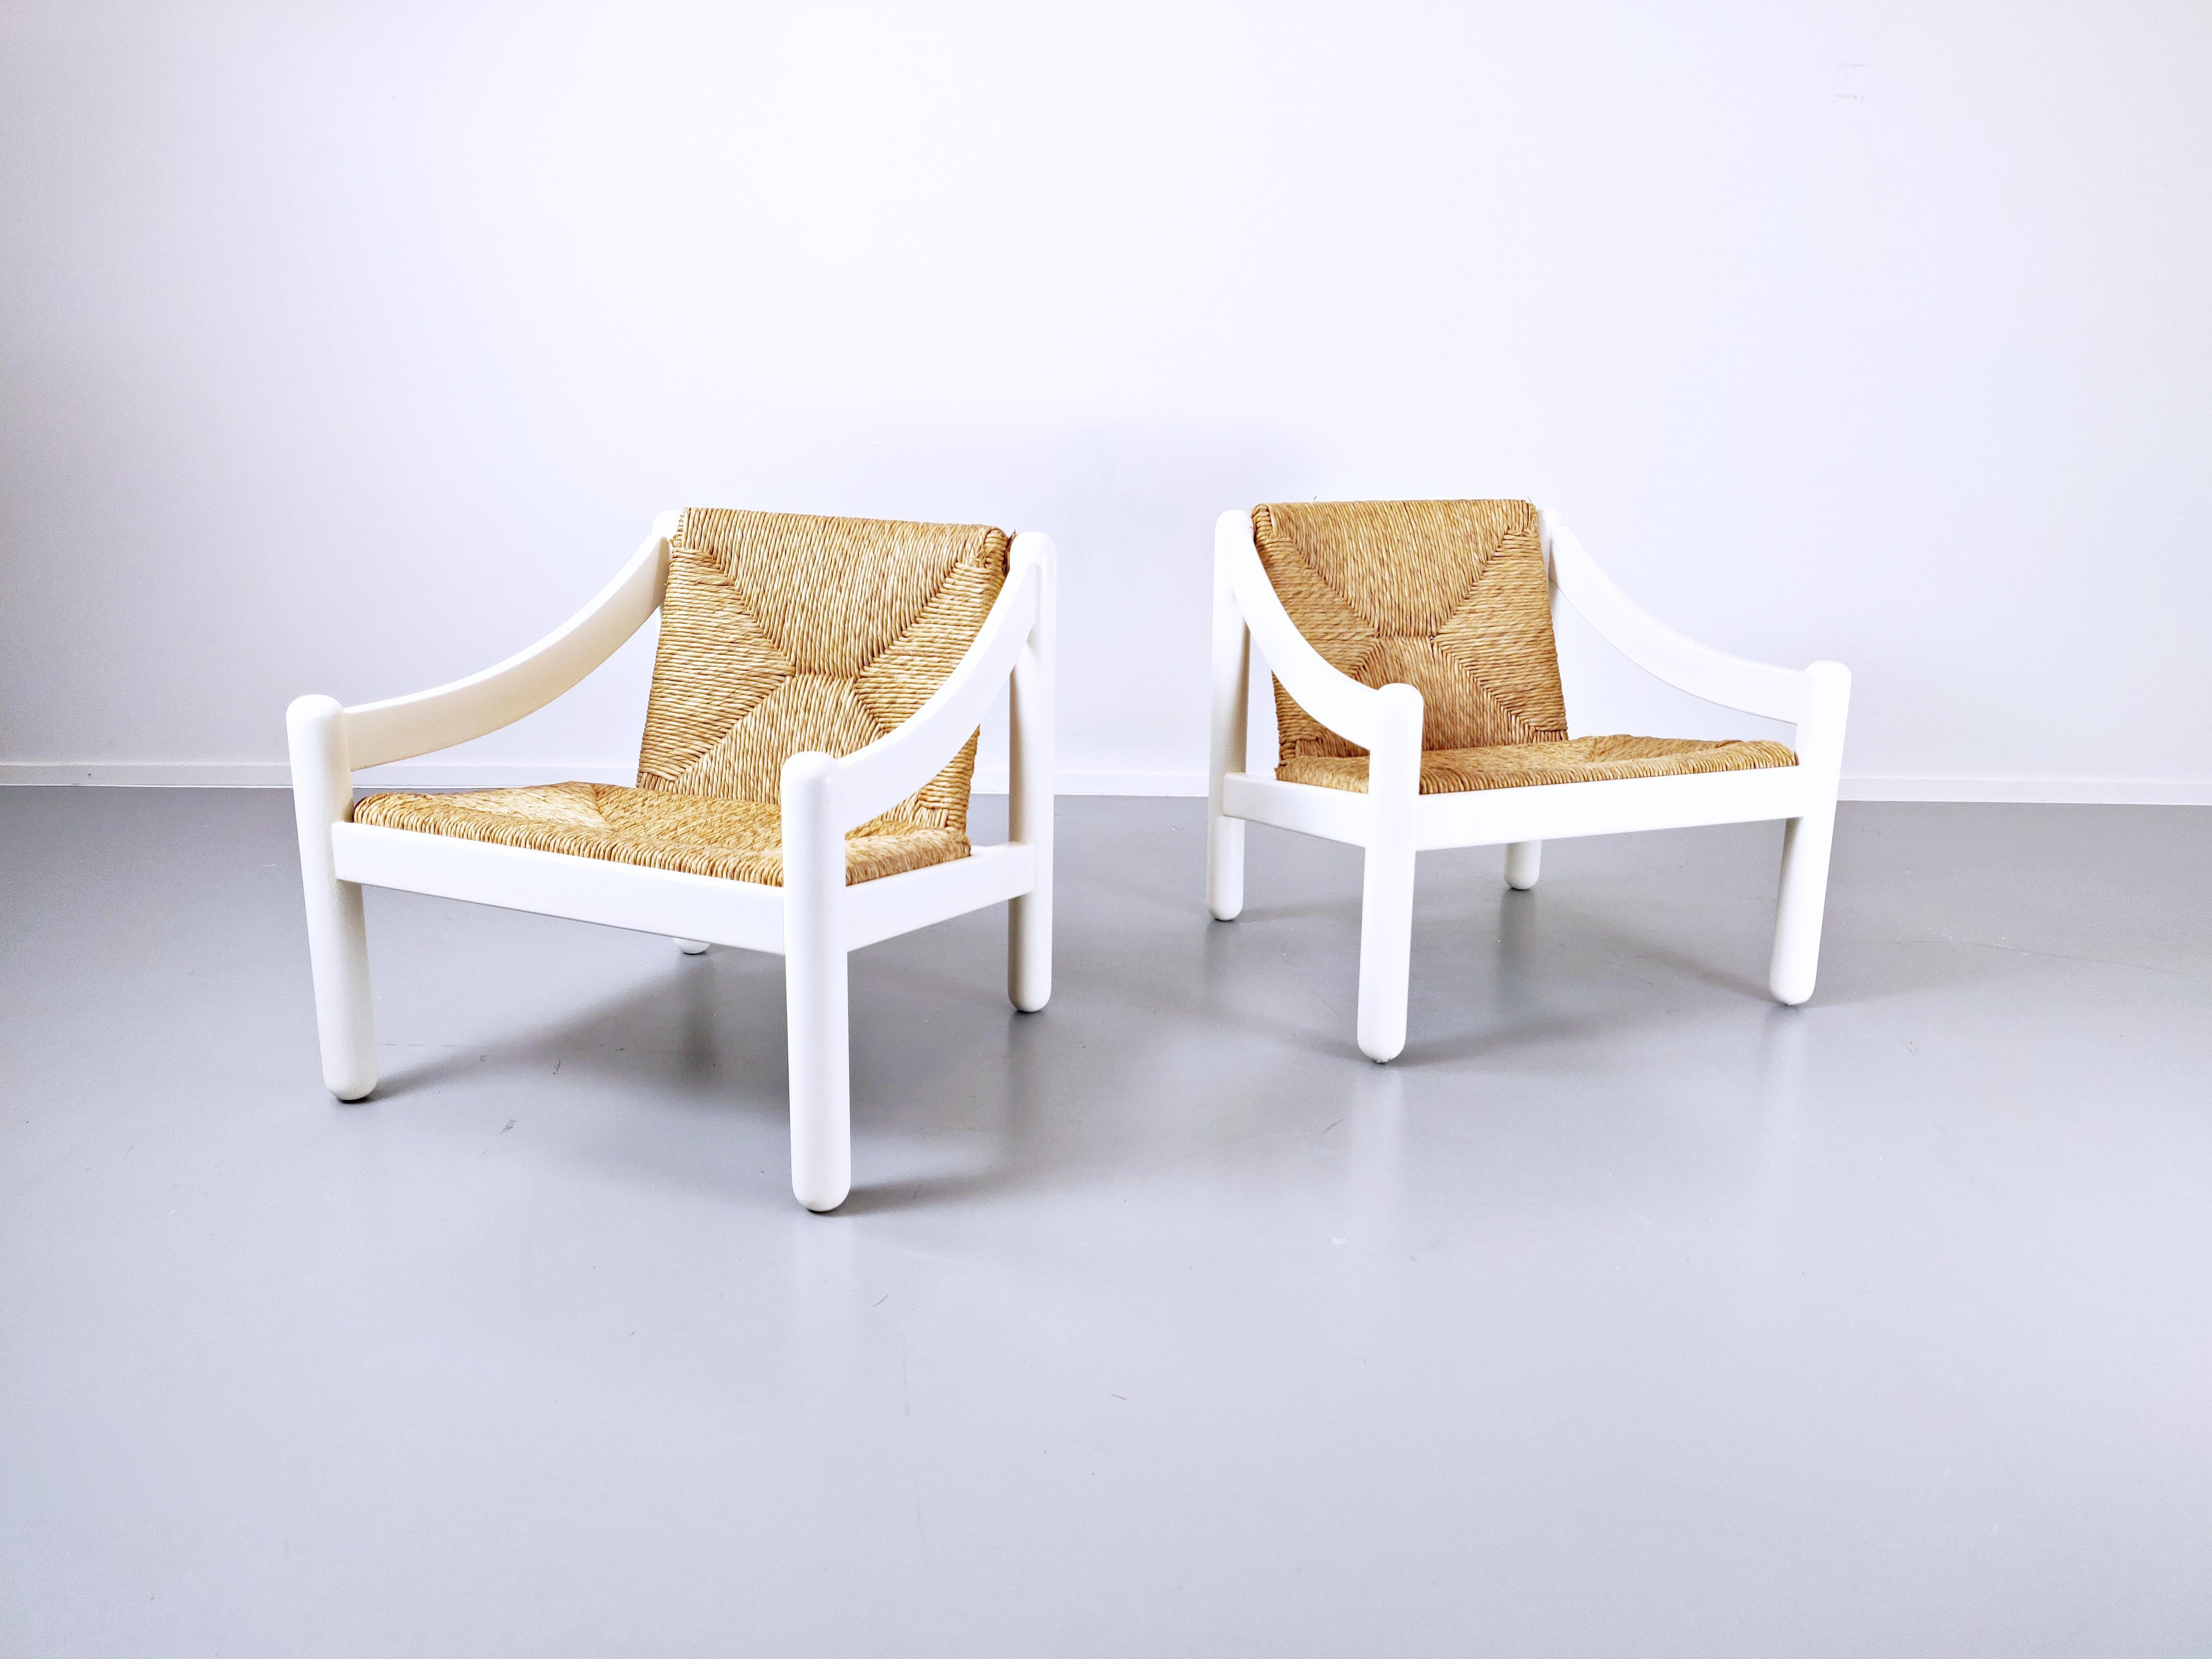 Carimate easy chairs by Vico Magistretti, 1960s.